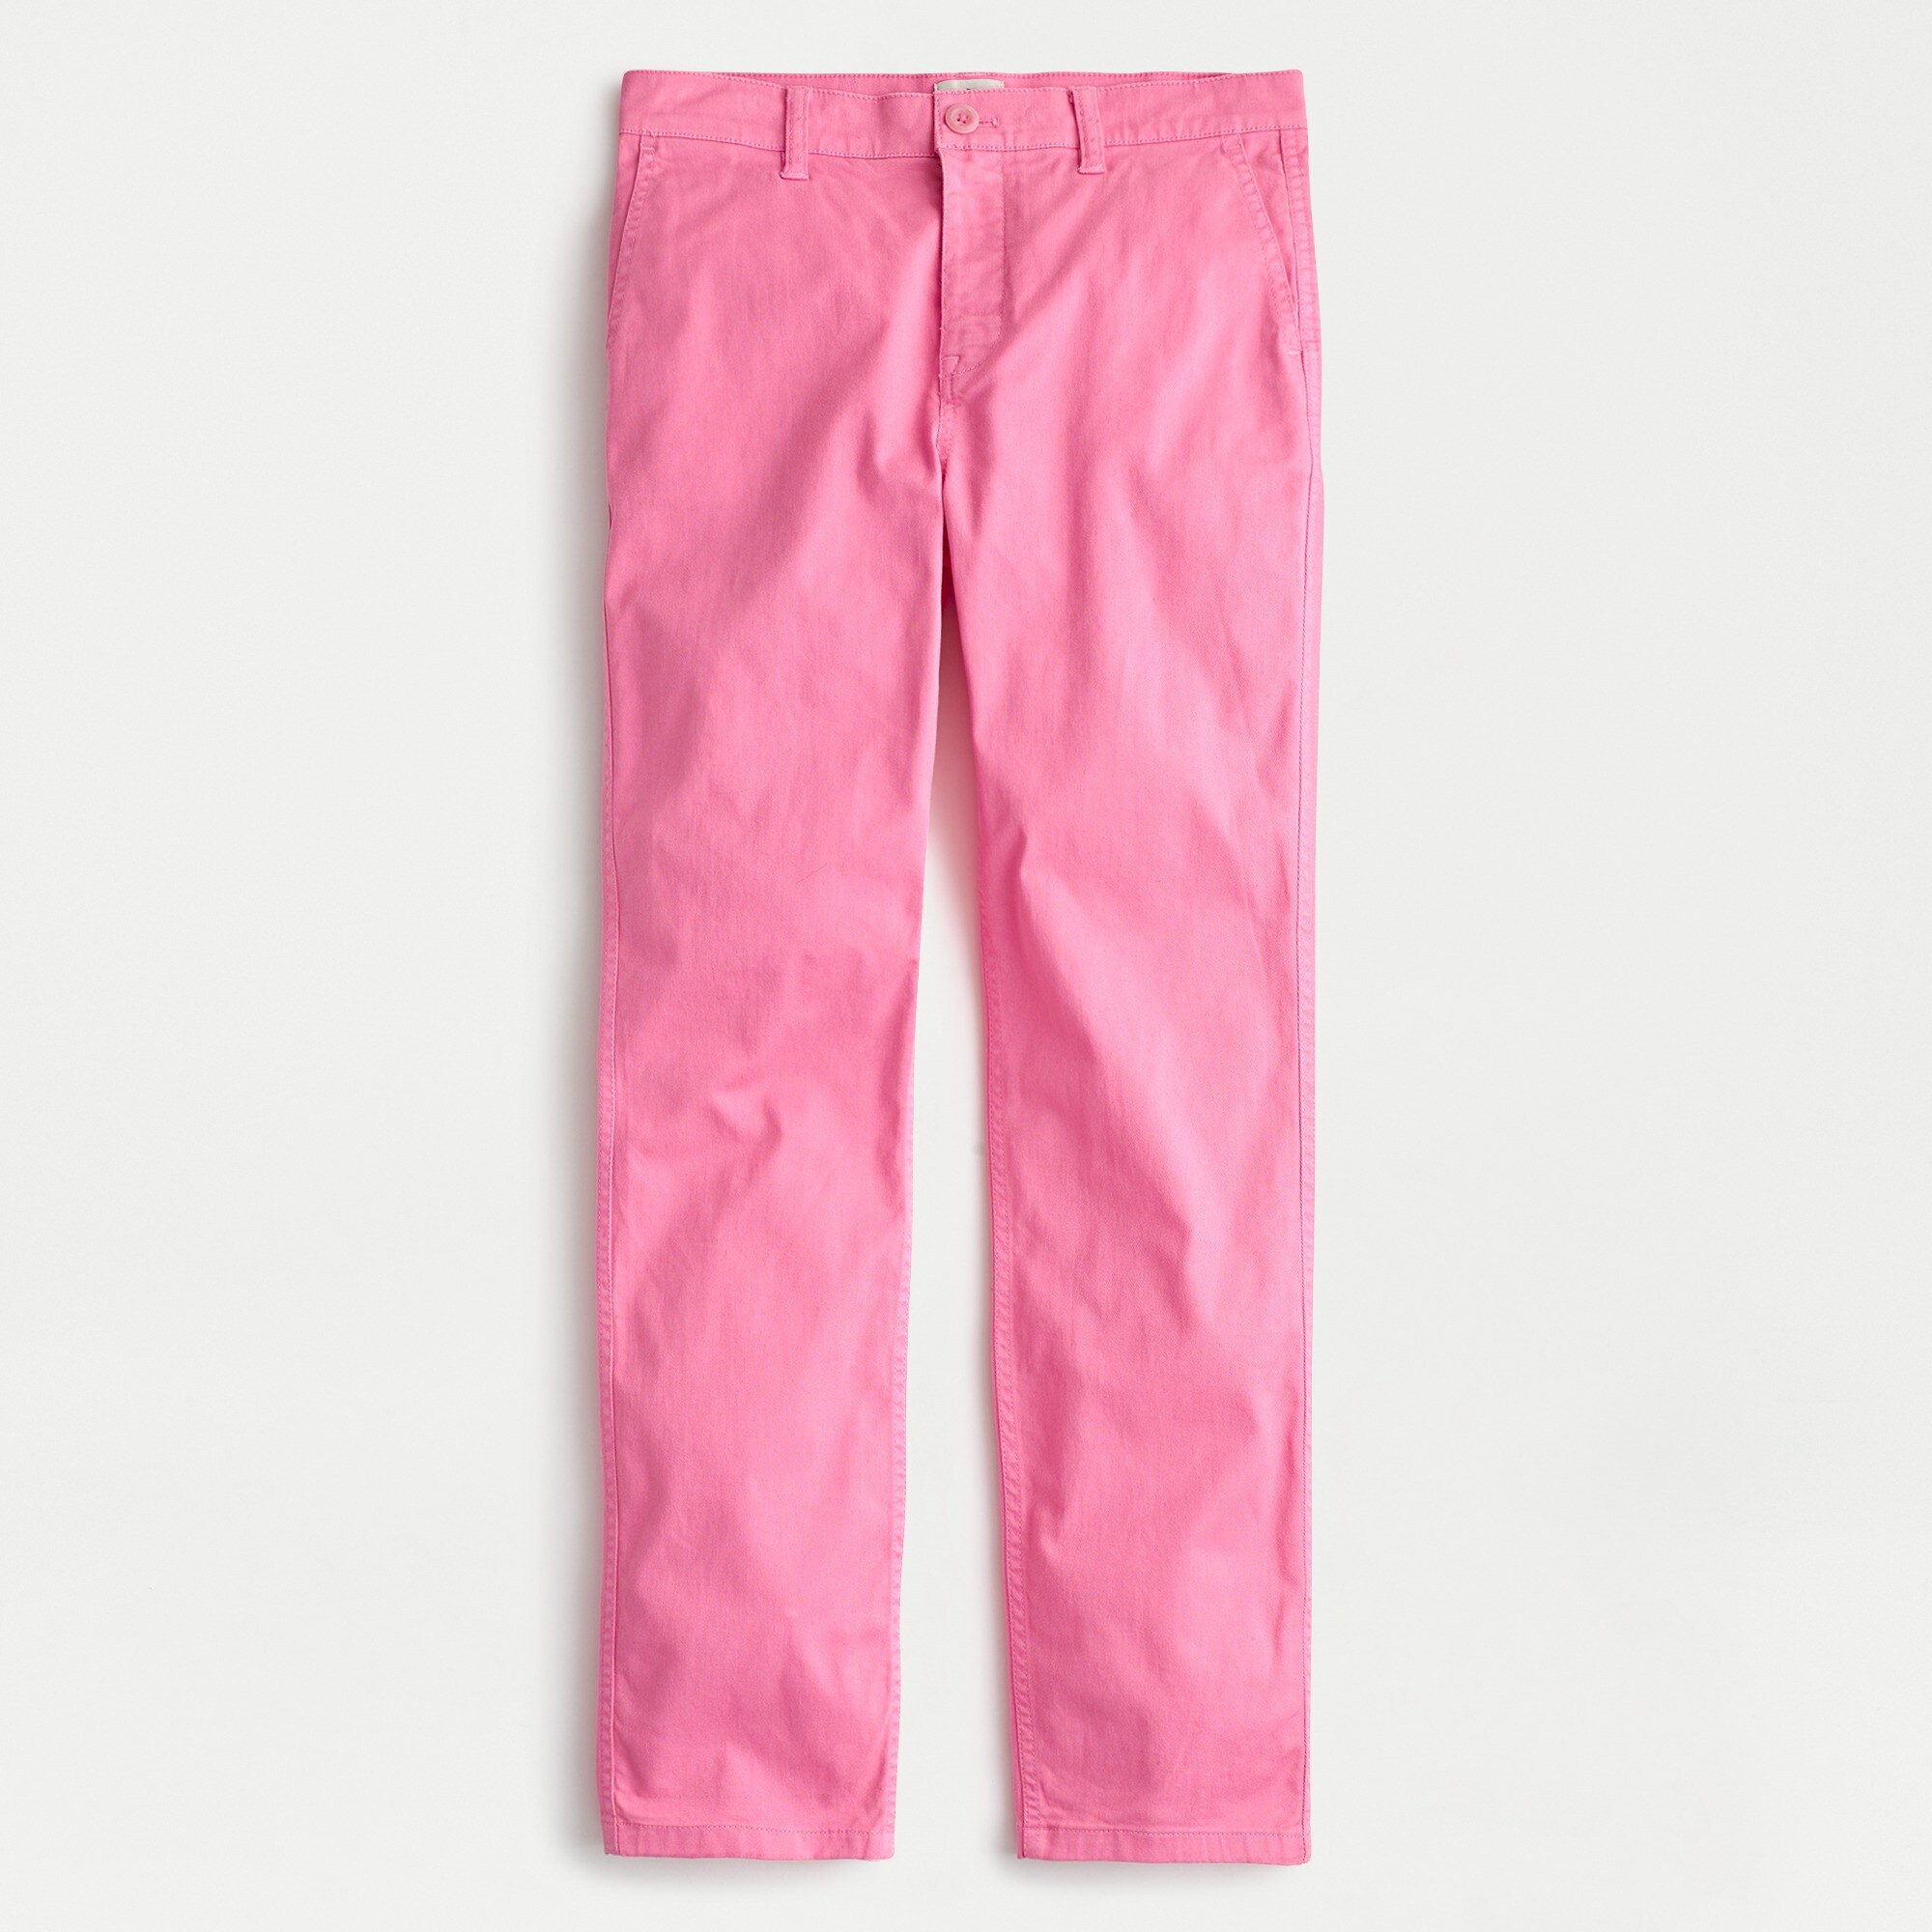 J.Crew: Vintage Straight Pant In Garment-dyed Stretch Chino For Women